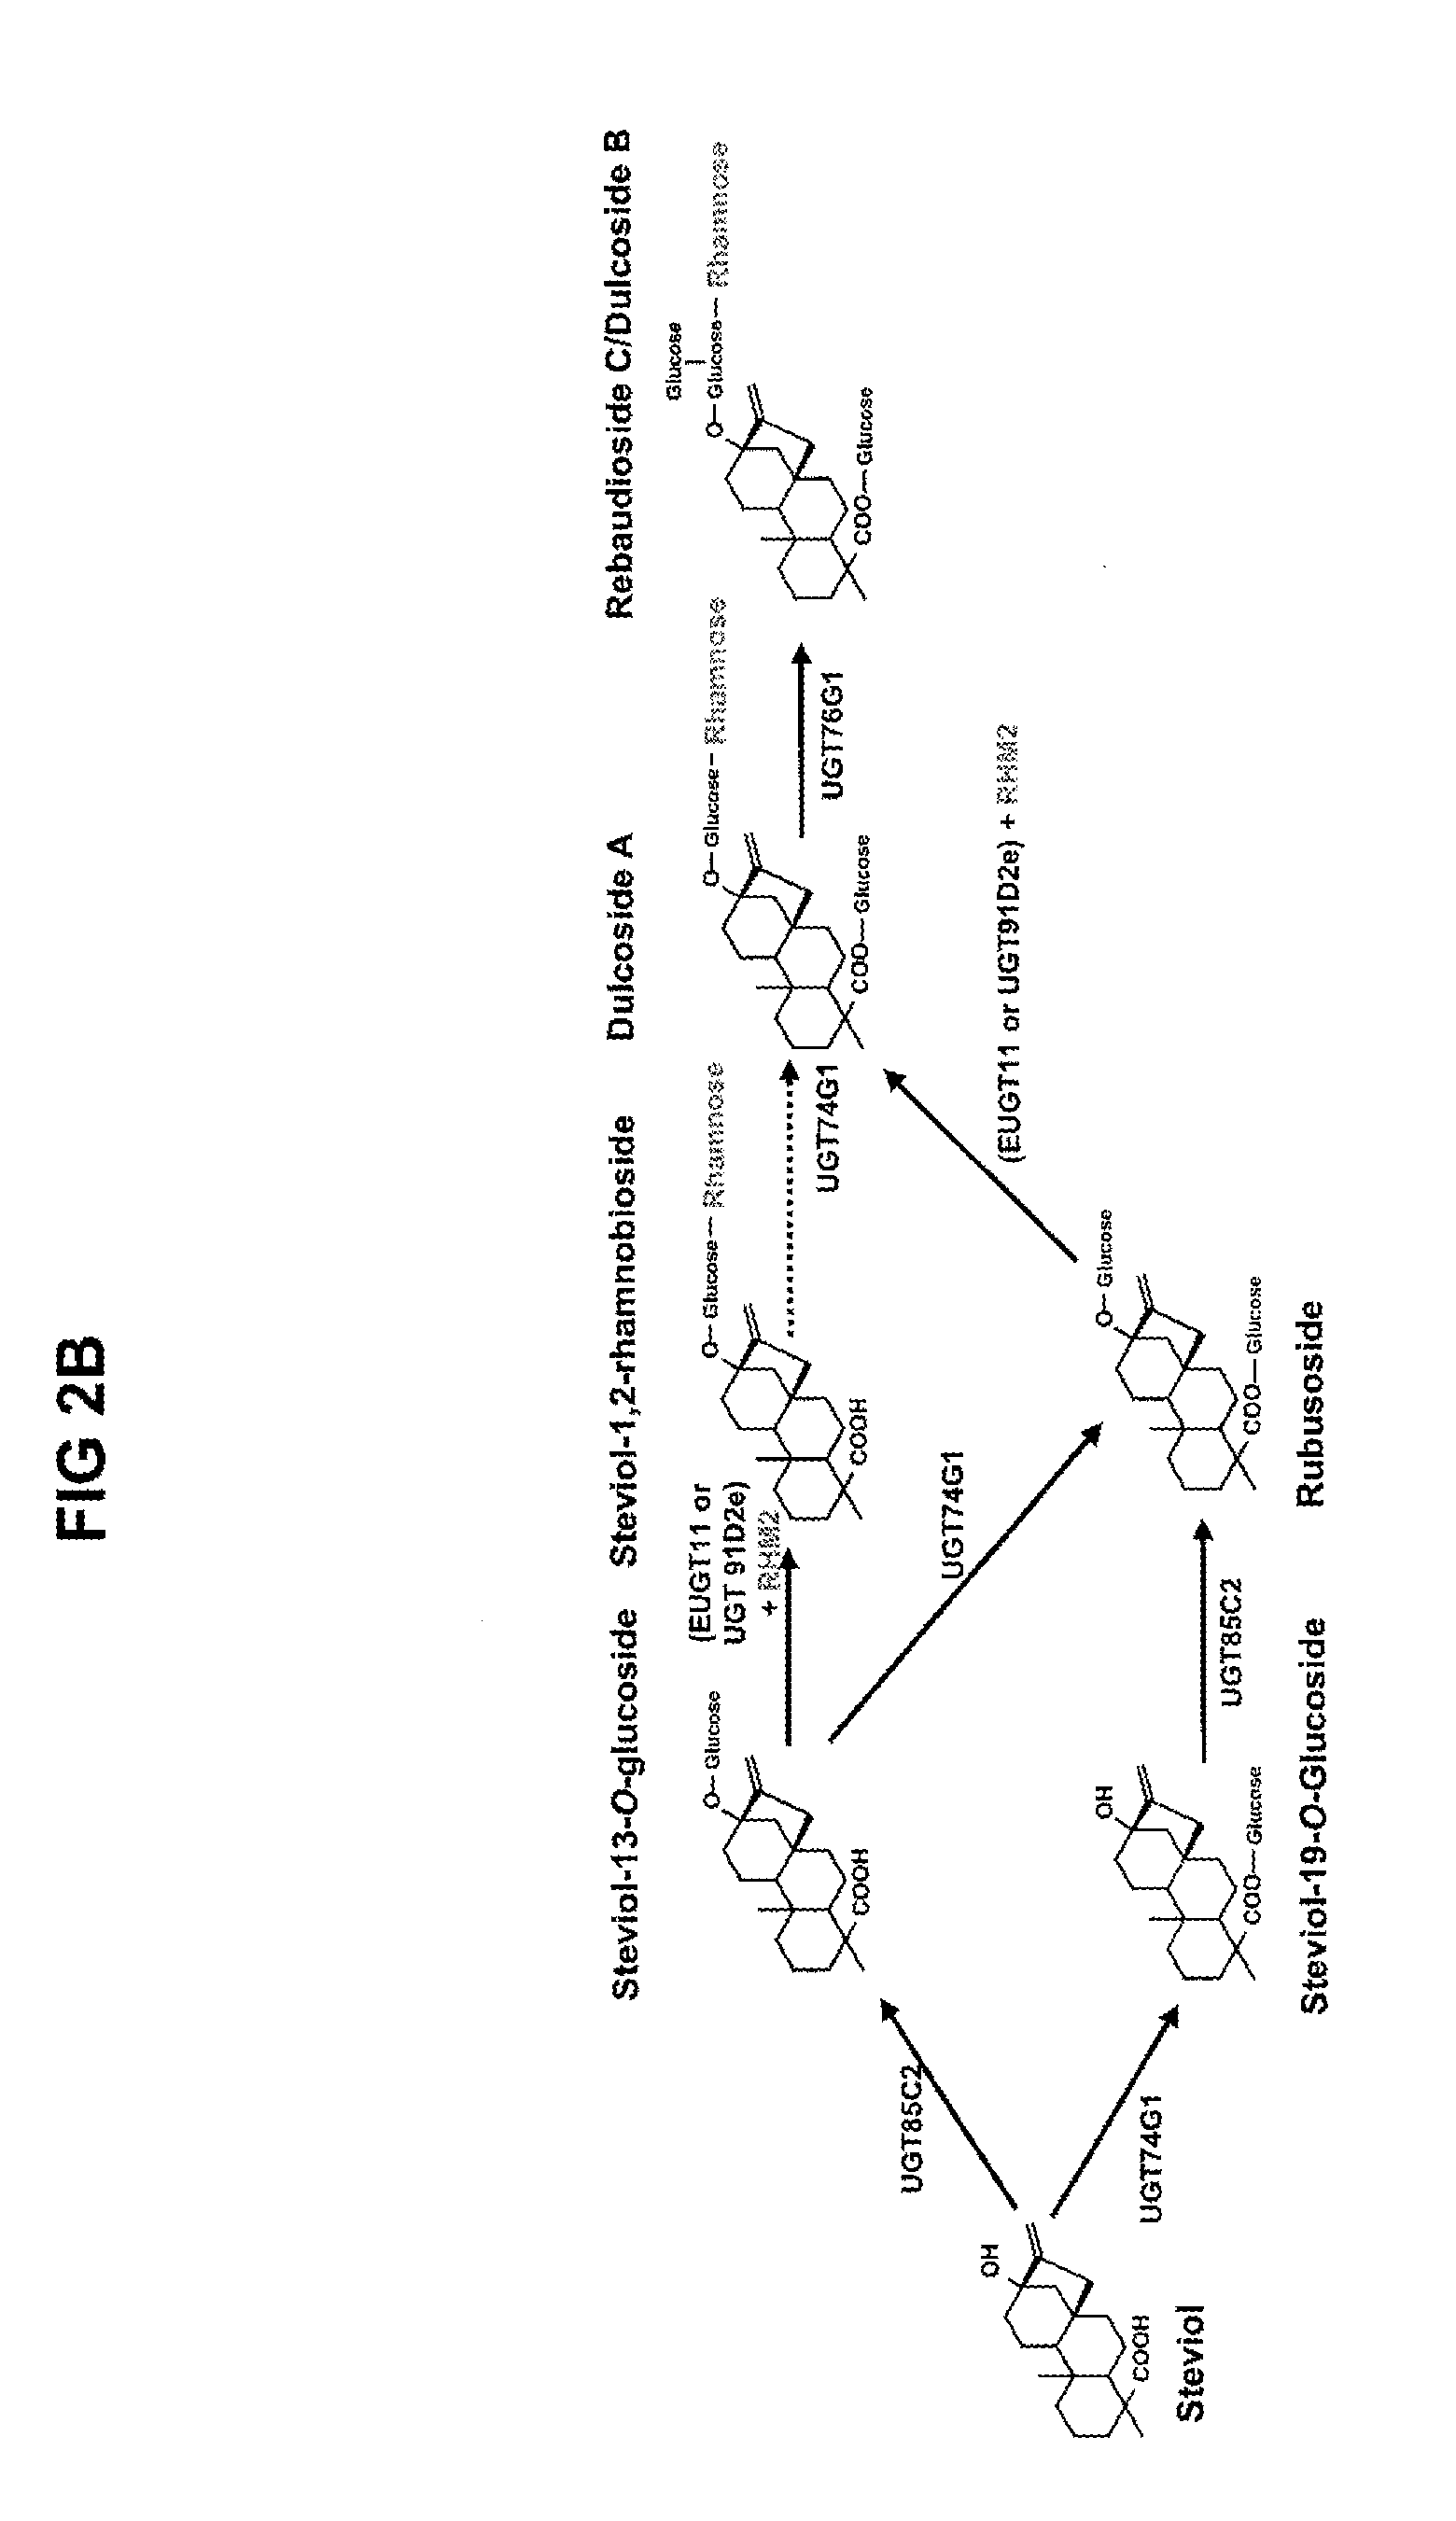 Recombinant Production of Steviol Glycosides